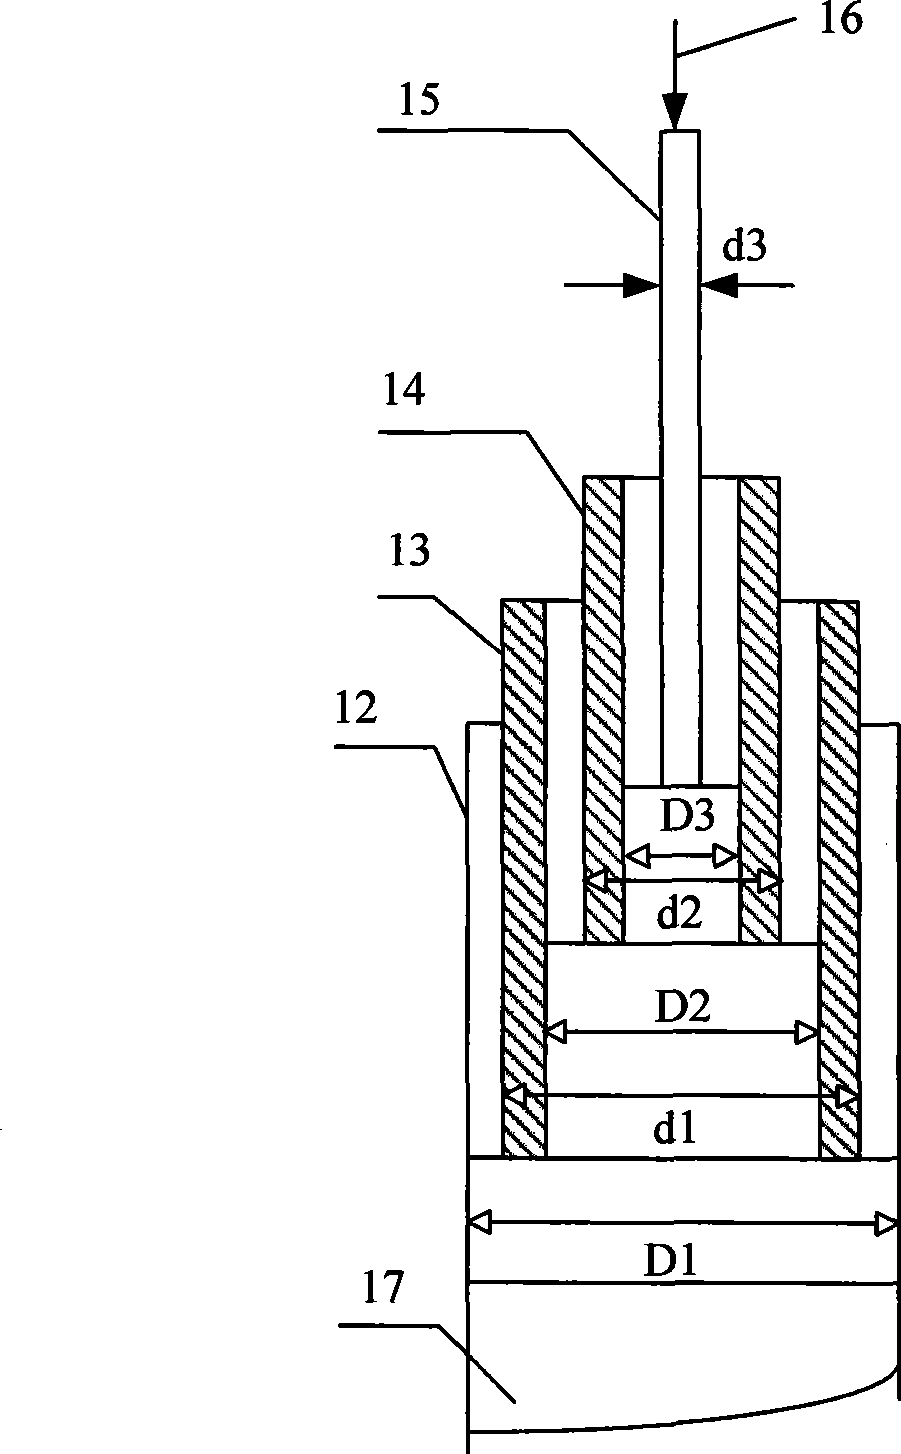 Vehicle power generation system based on wind energy and fuel hybrid power and control method thereof